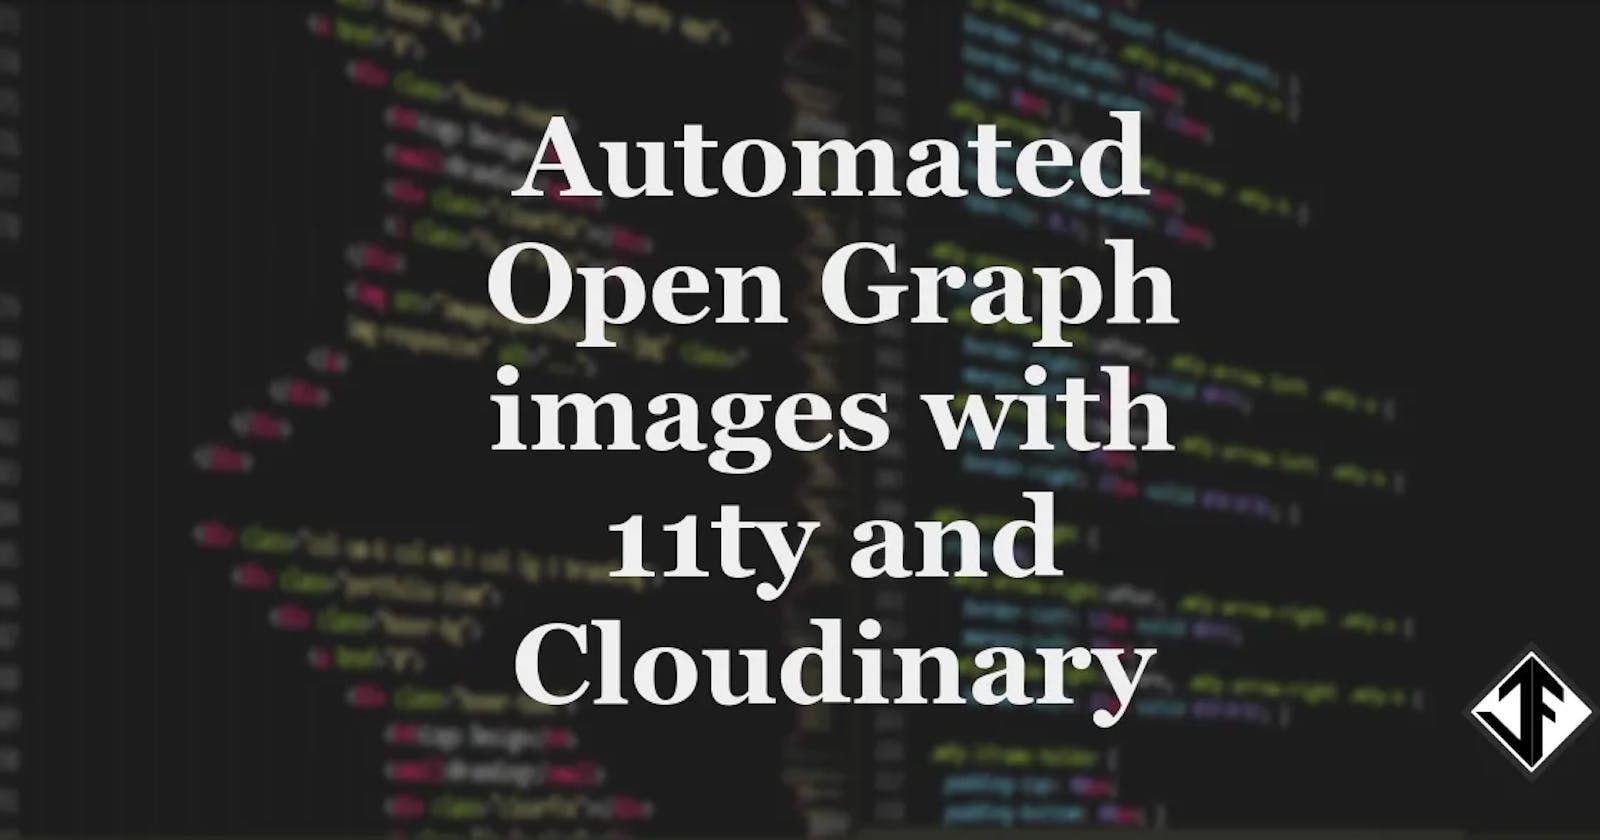 Automated Open Graph images with 11ty and Cloudinary